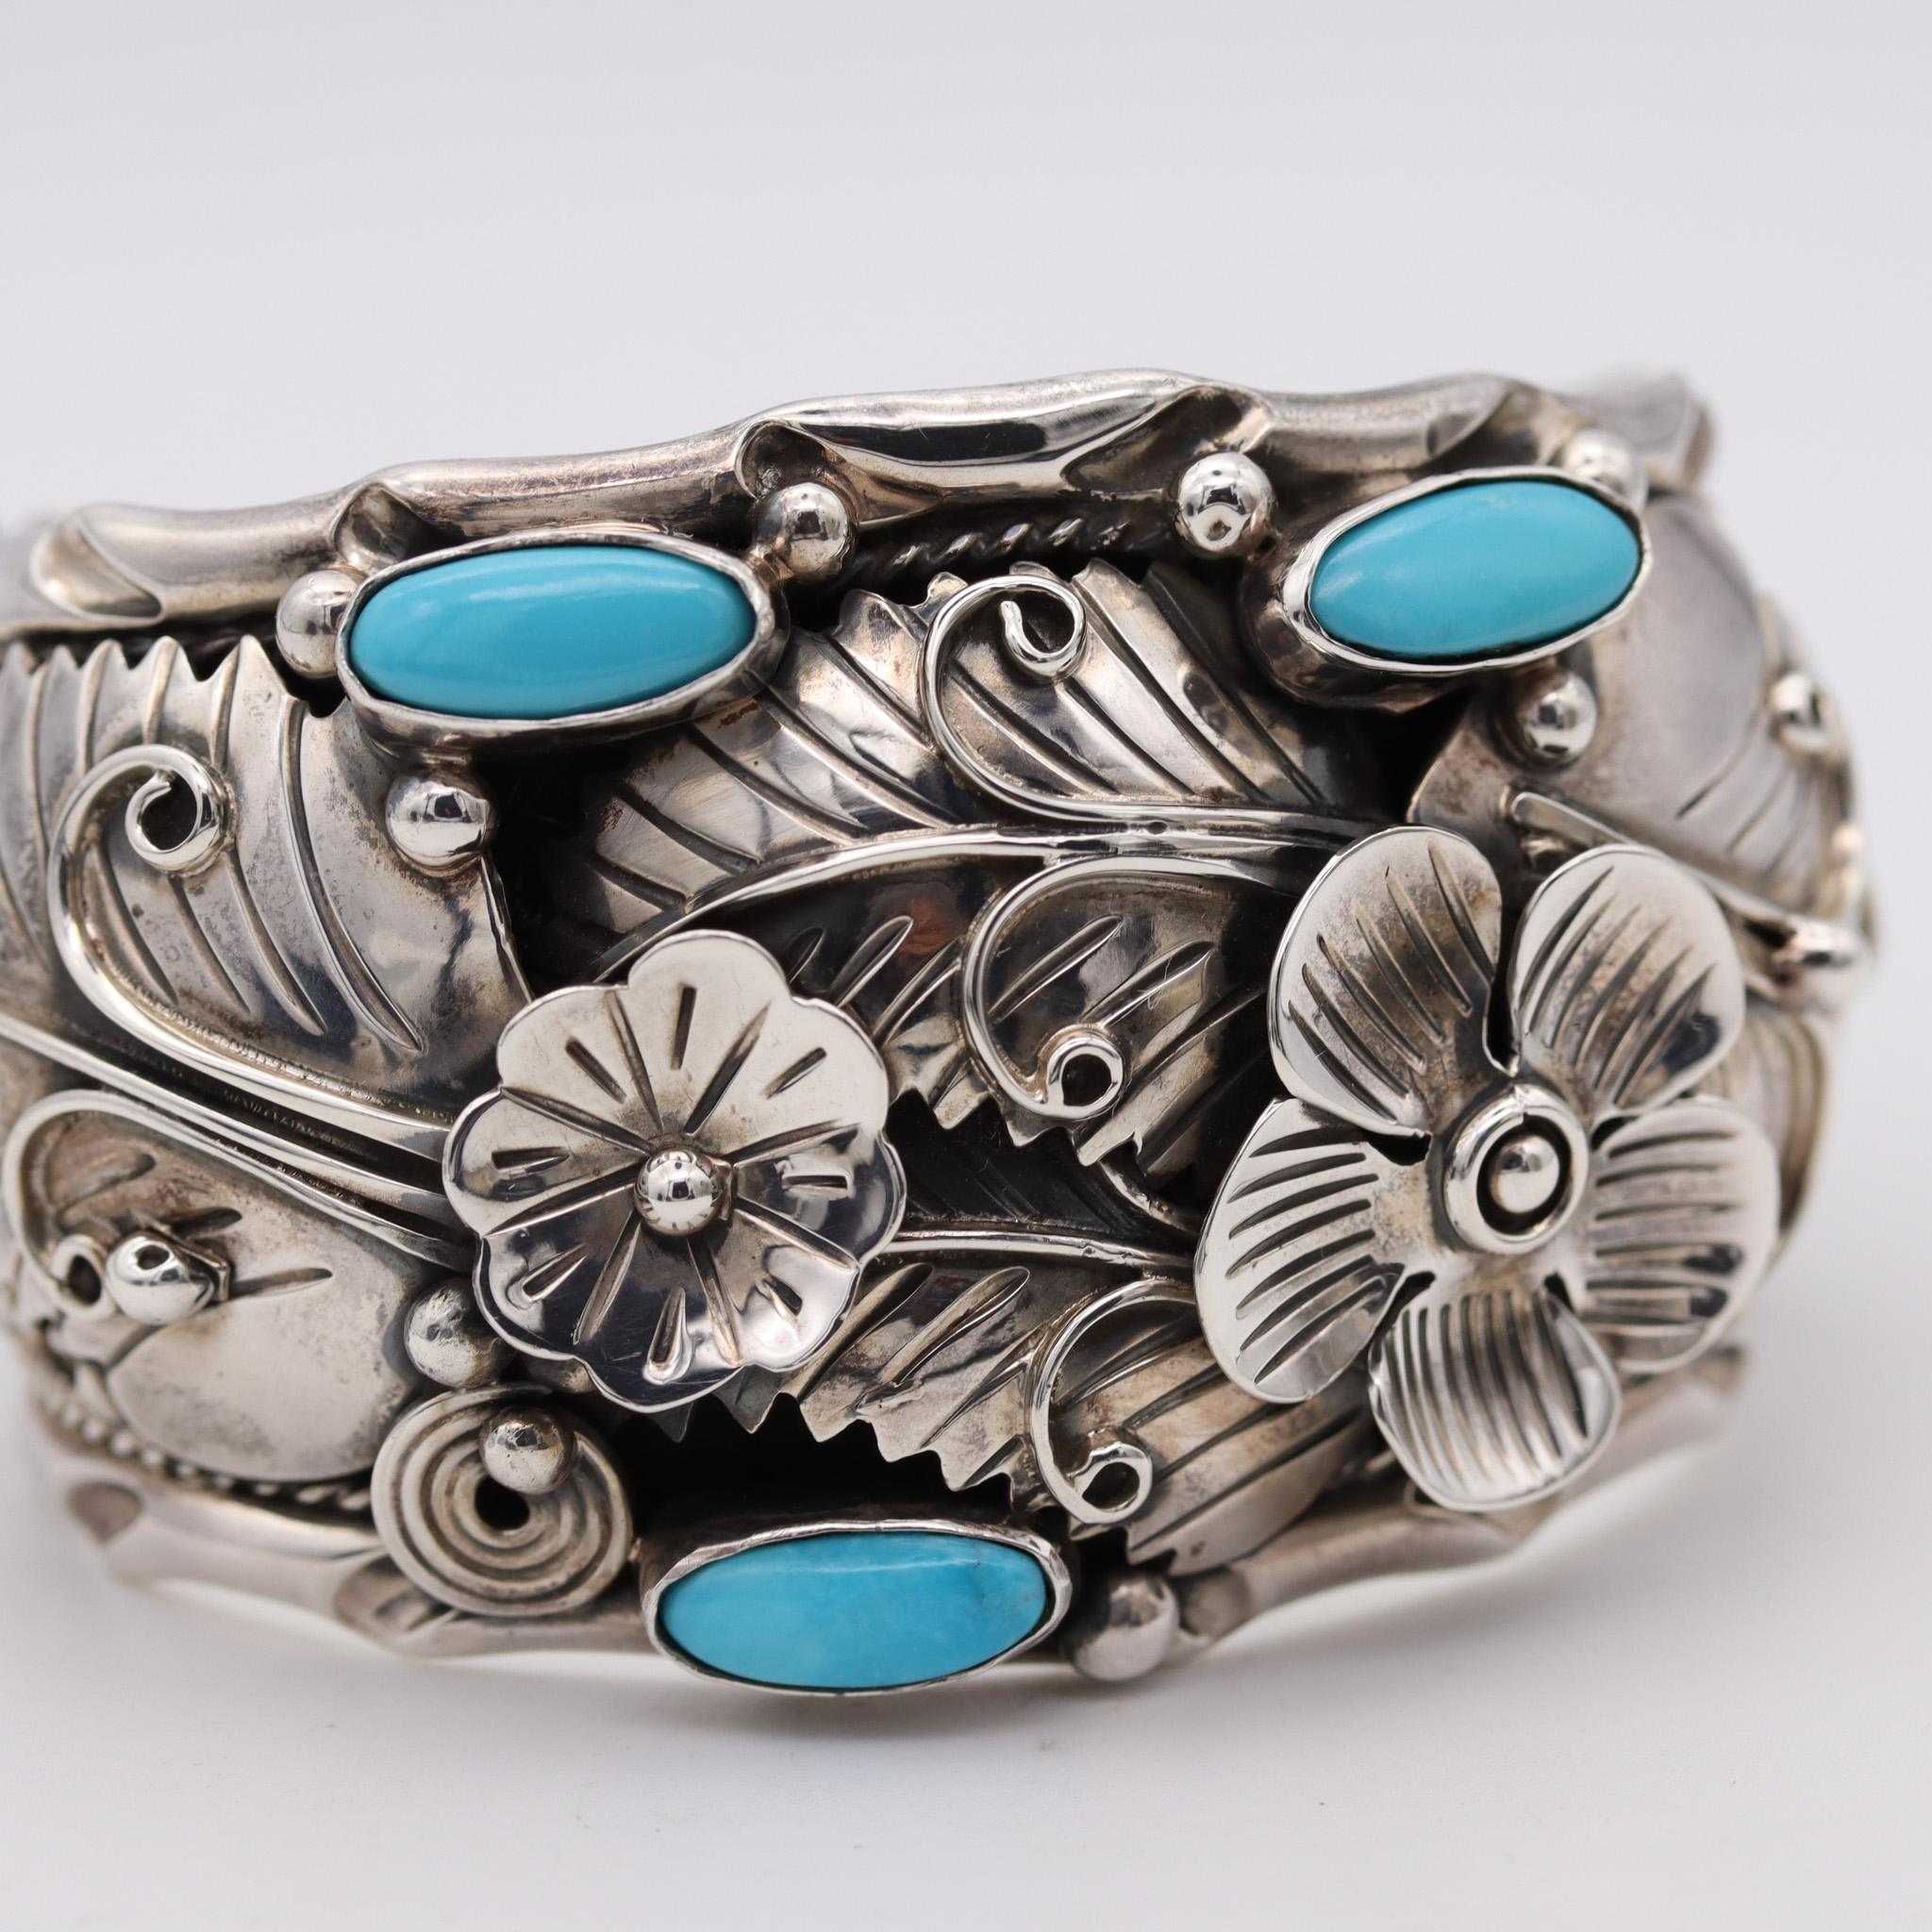 Native American Mexico 1950 Taxco Statement Cuff Bracelet In 925 Sterling Silver With Turquoises For Sale